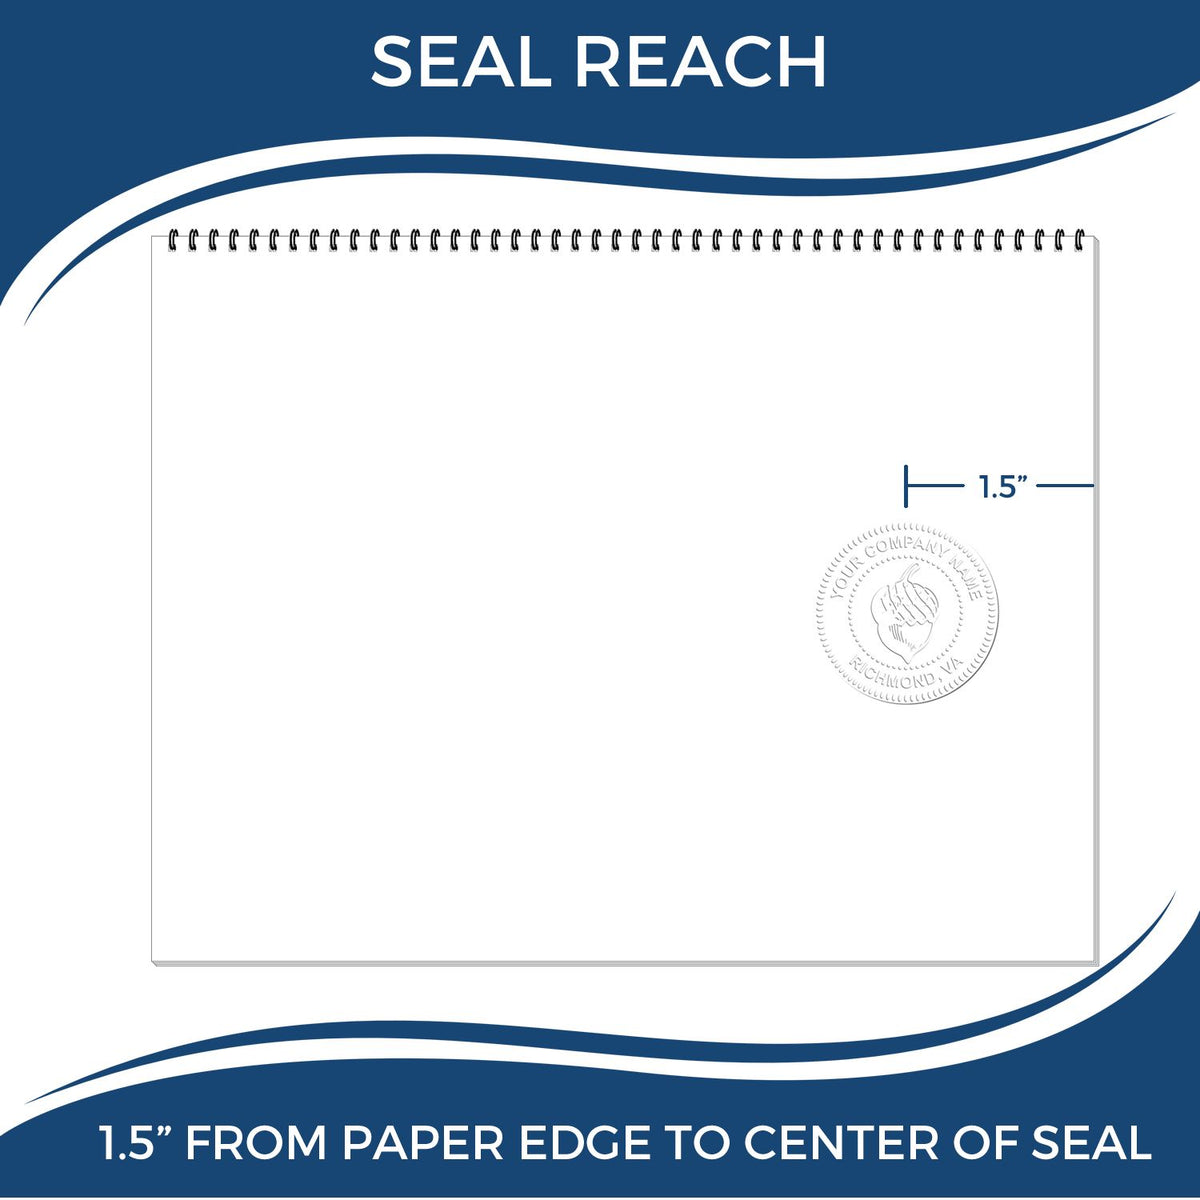 An infographic showing the seal reach which is represented by a ruler and a miniature seal image of the State of Louisiana Soft Land Surveyor Embossing Seal